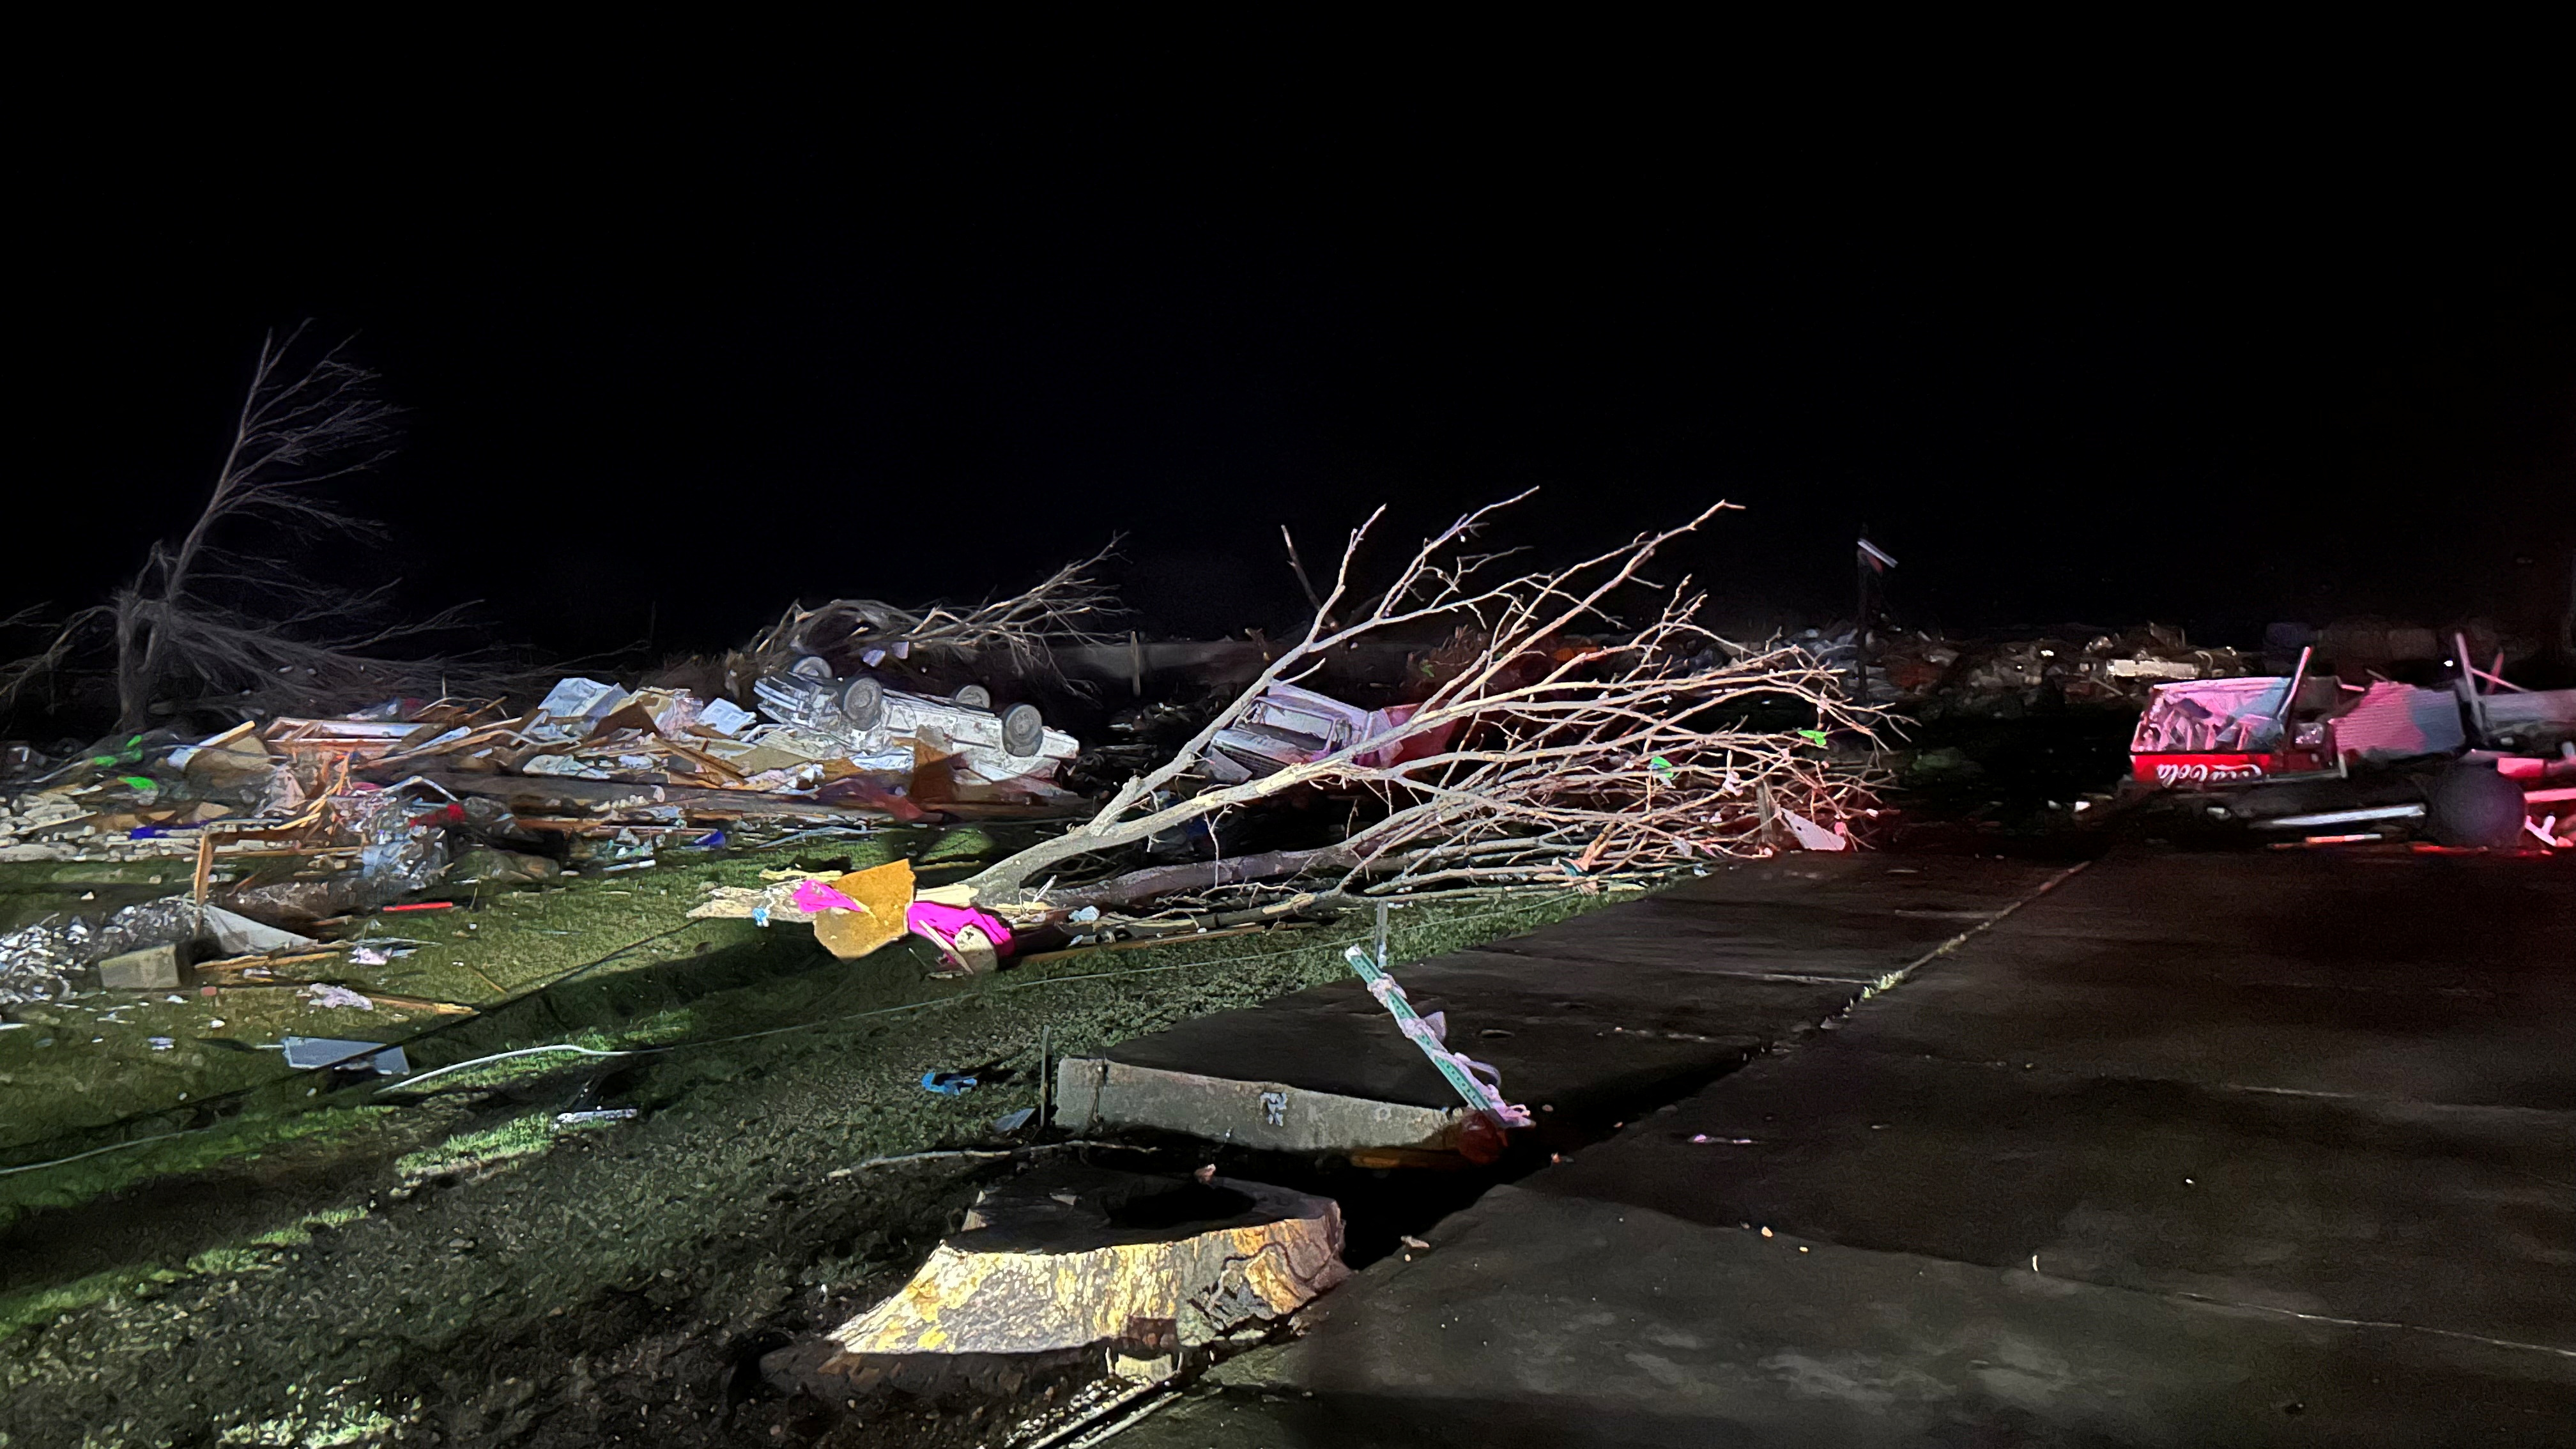 Photos and videos: The terrible images of the tornado in Mississippi